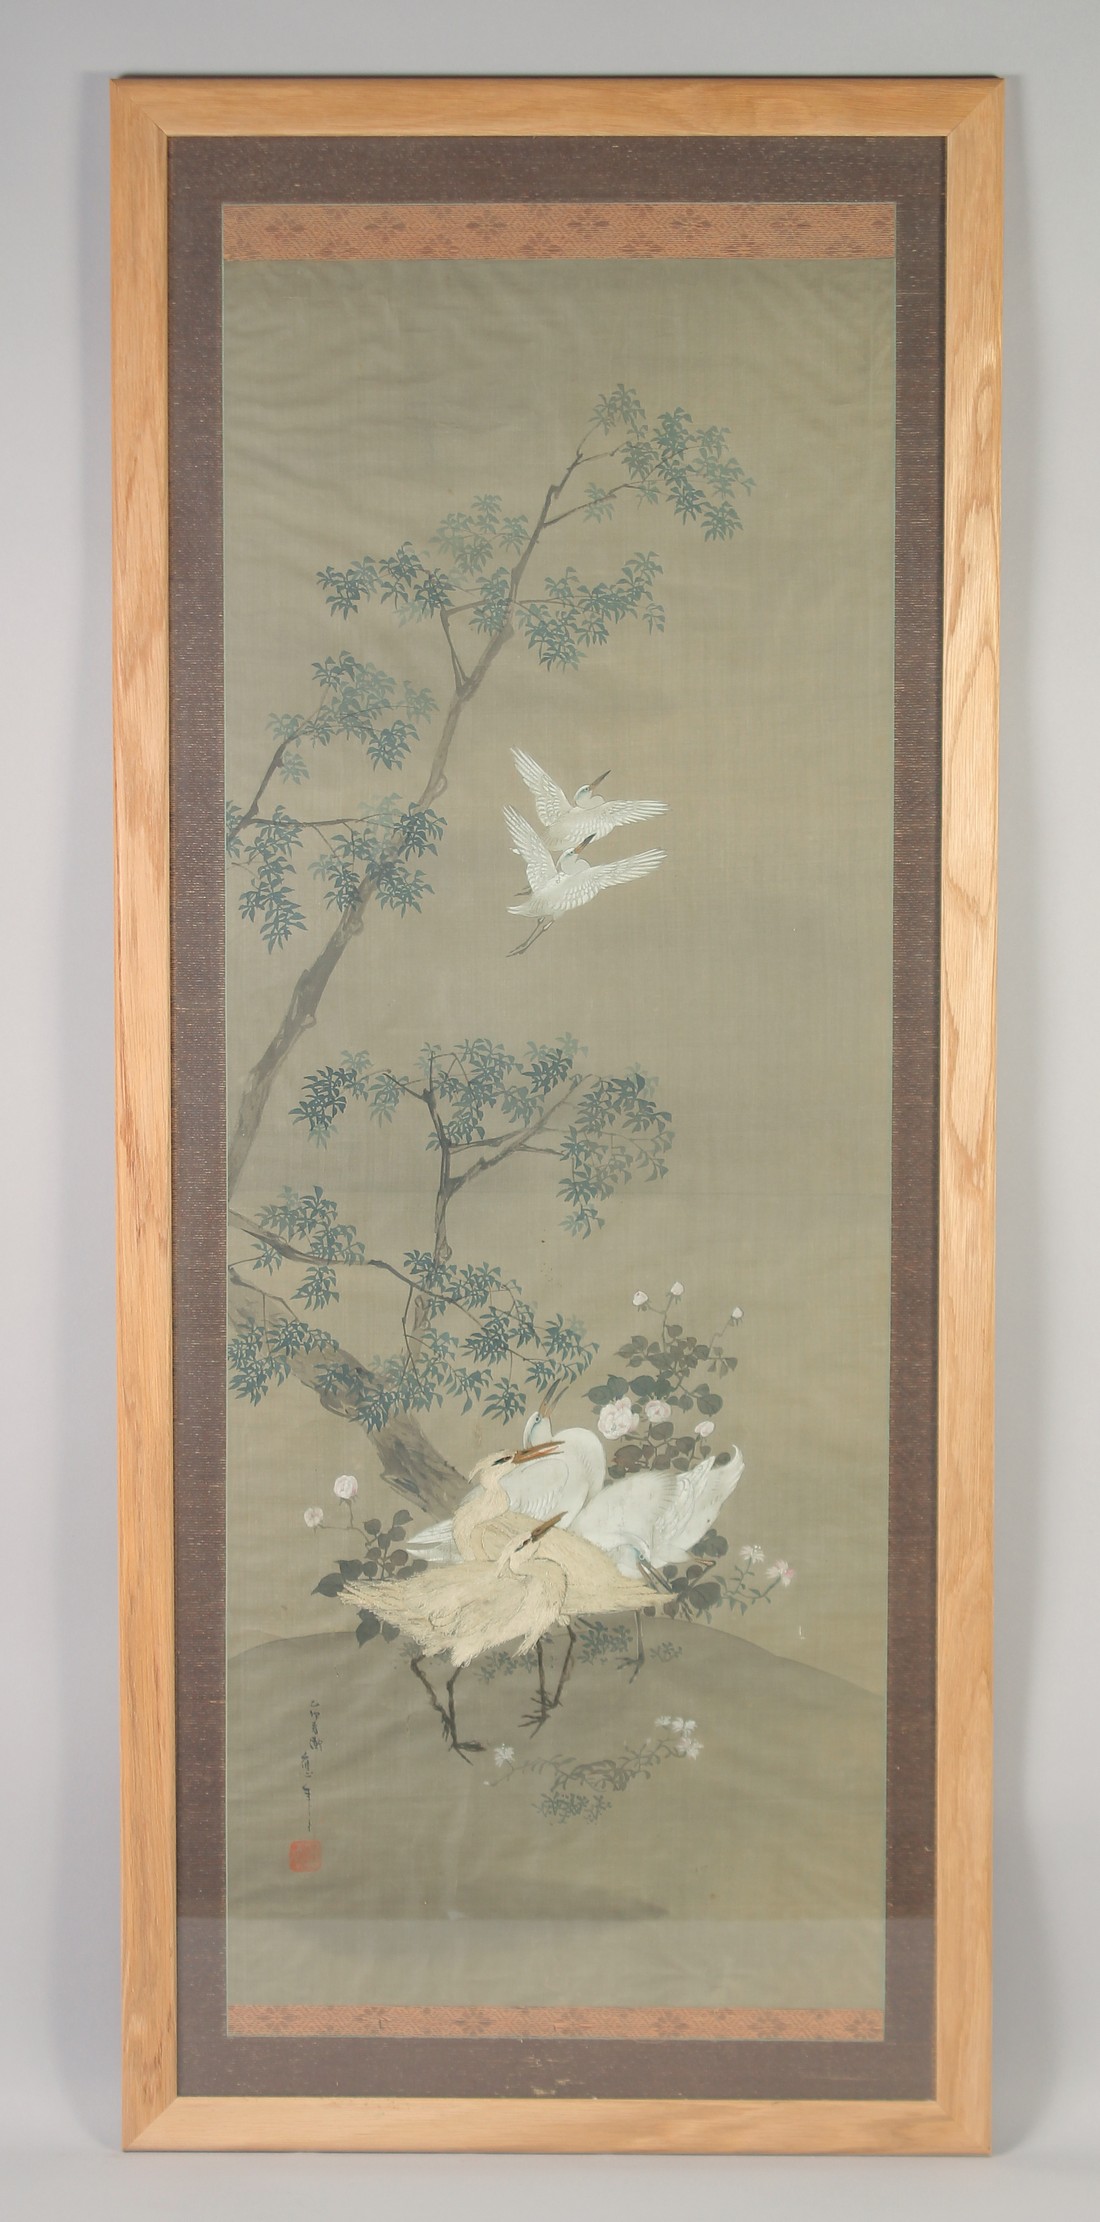 A 19TH CENTURY FRAMED JAPANESE SCROLL PAINTING ON SILK, depicting cranes - with two embroidered